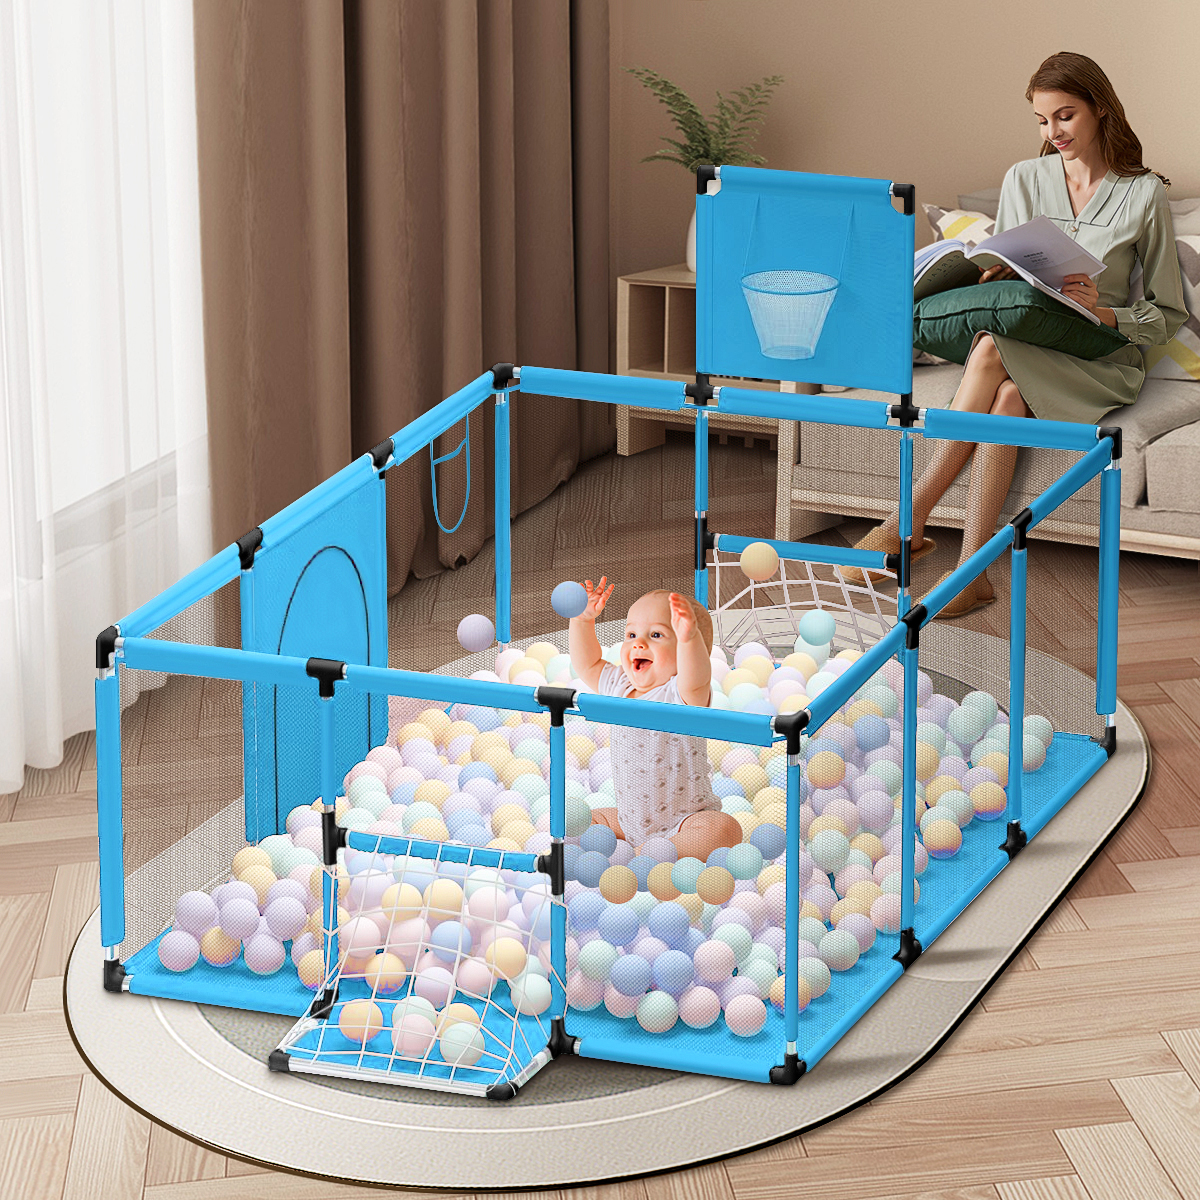 Baby-Playpen-Oxford-Cloth-Children-Infant-Fence-Safety-Barriers-Children-Ball-Pool-Baby-Playground-G-1935212-7